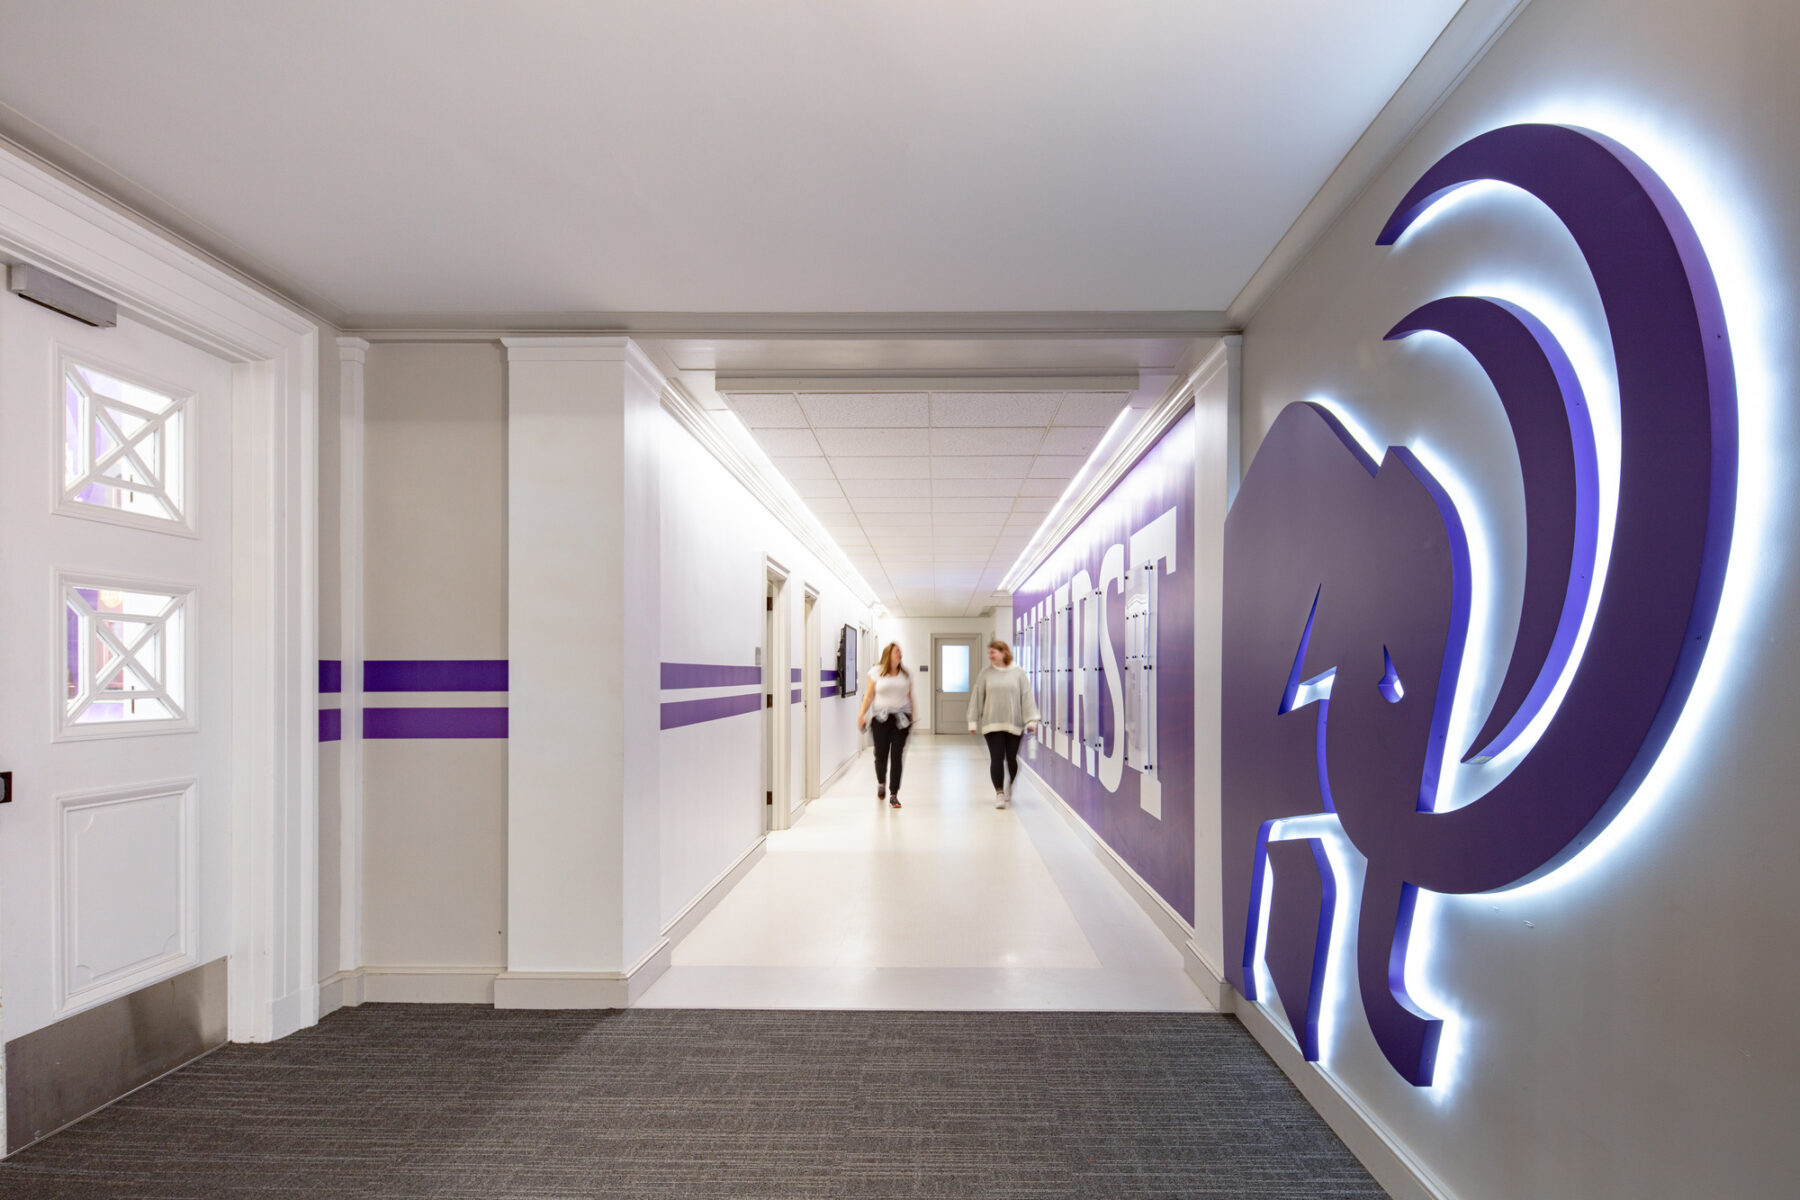 photograph of students walking down hallway with custom graphics featured on walls